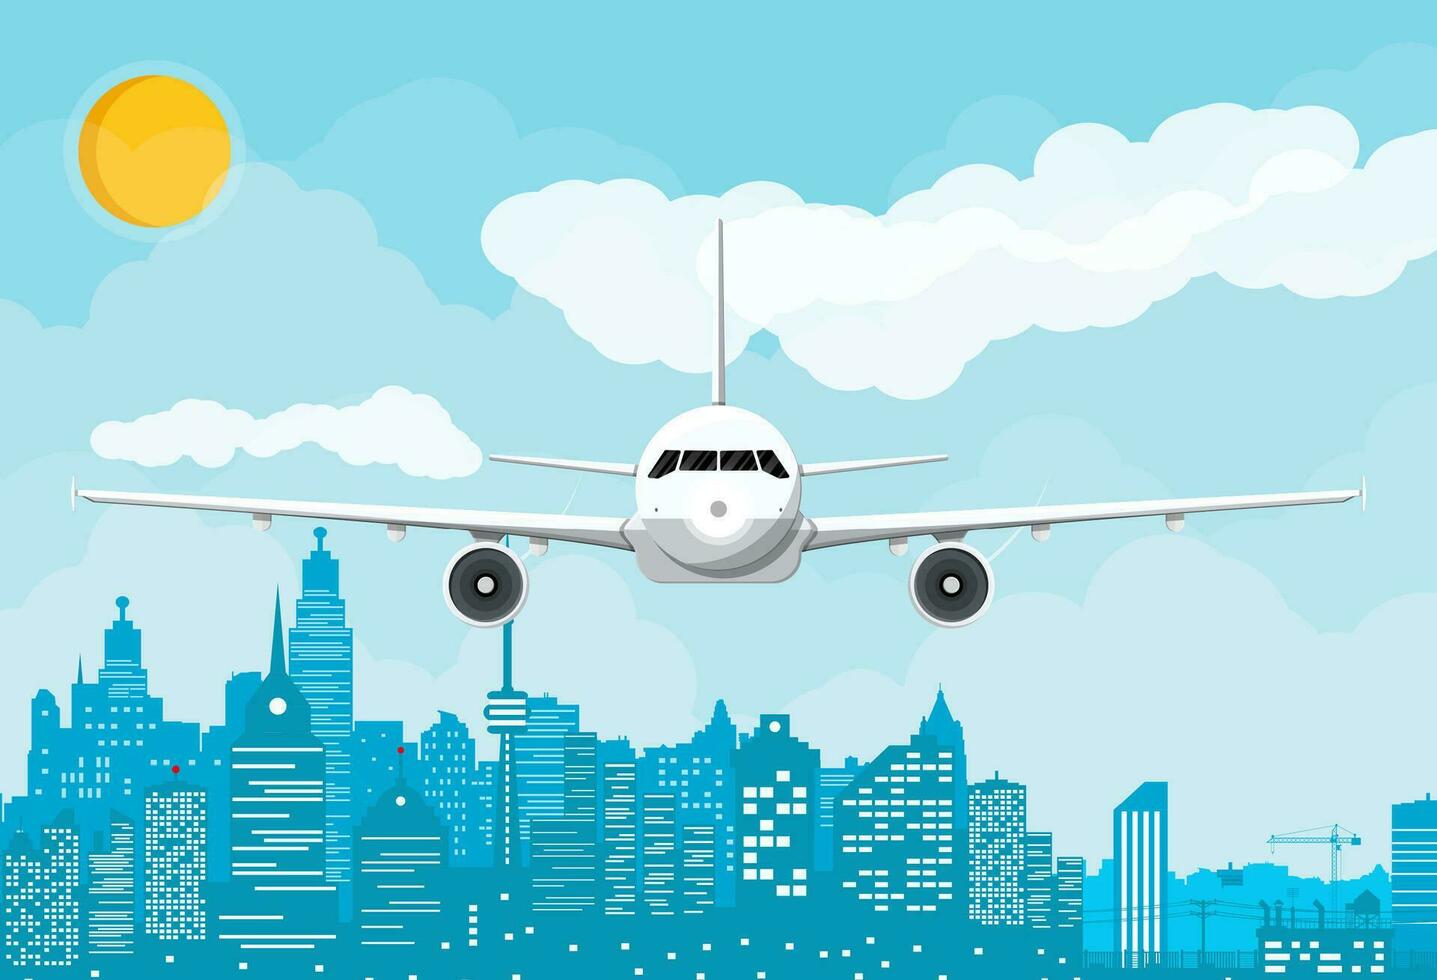 Airplane and city skyline silhouette at day. Skyscappers, towers, office and residental buildings. Cityscape in daytime, sky, clouds and sun. Vector illustration